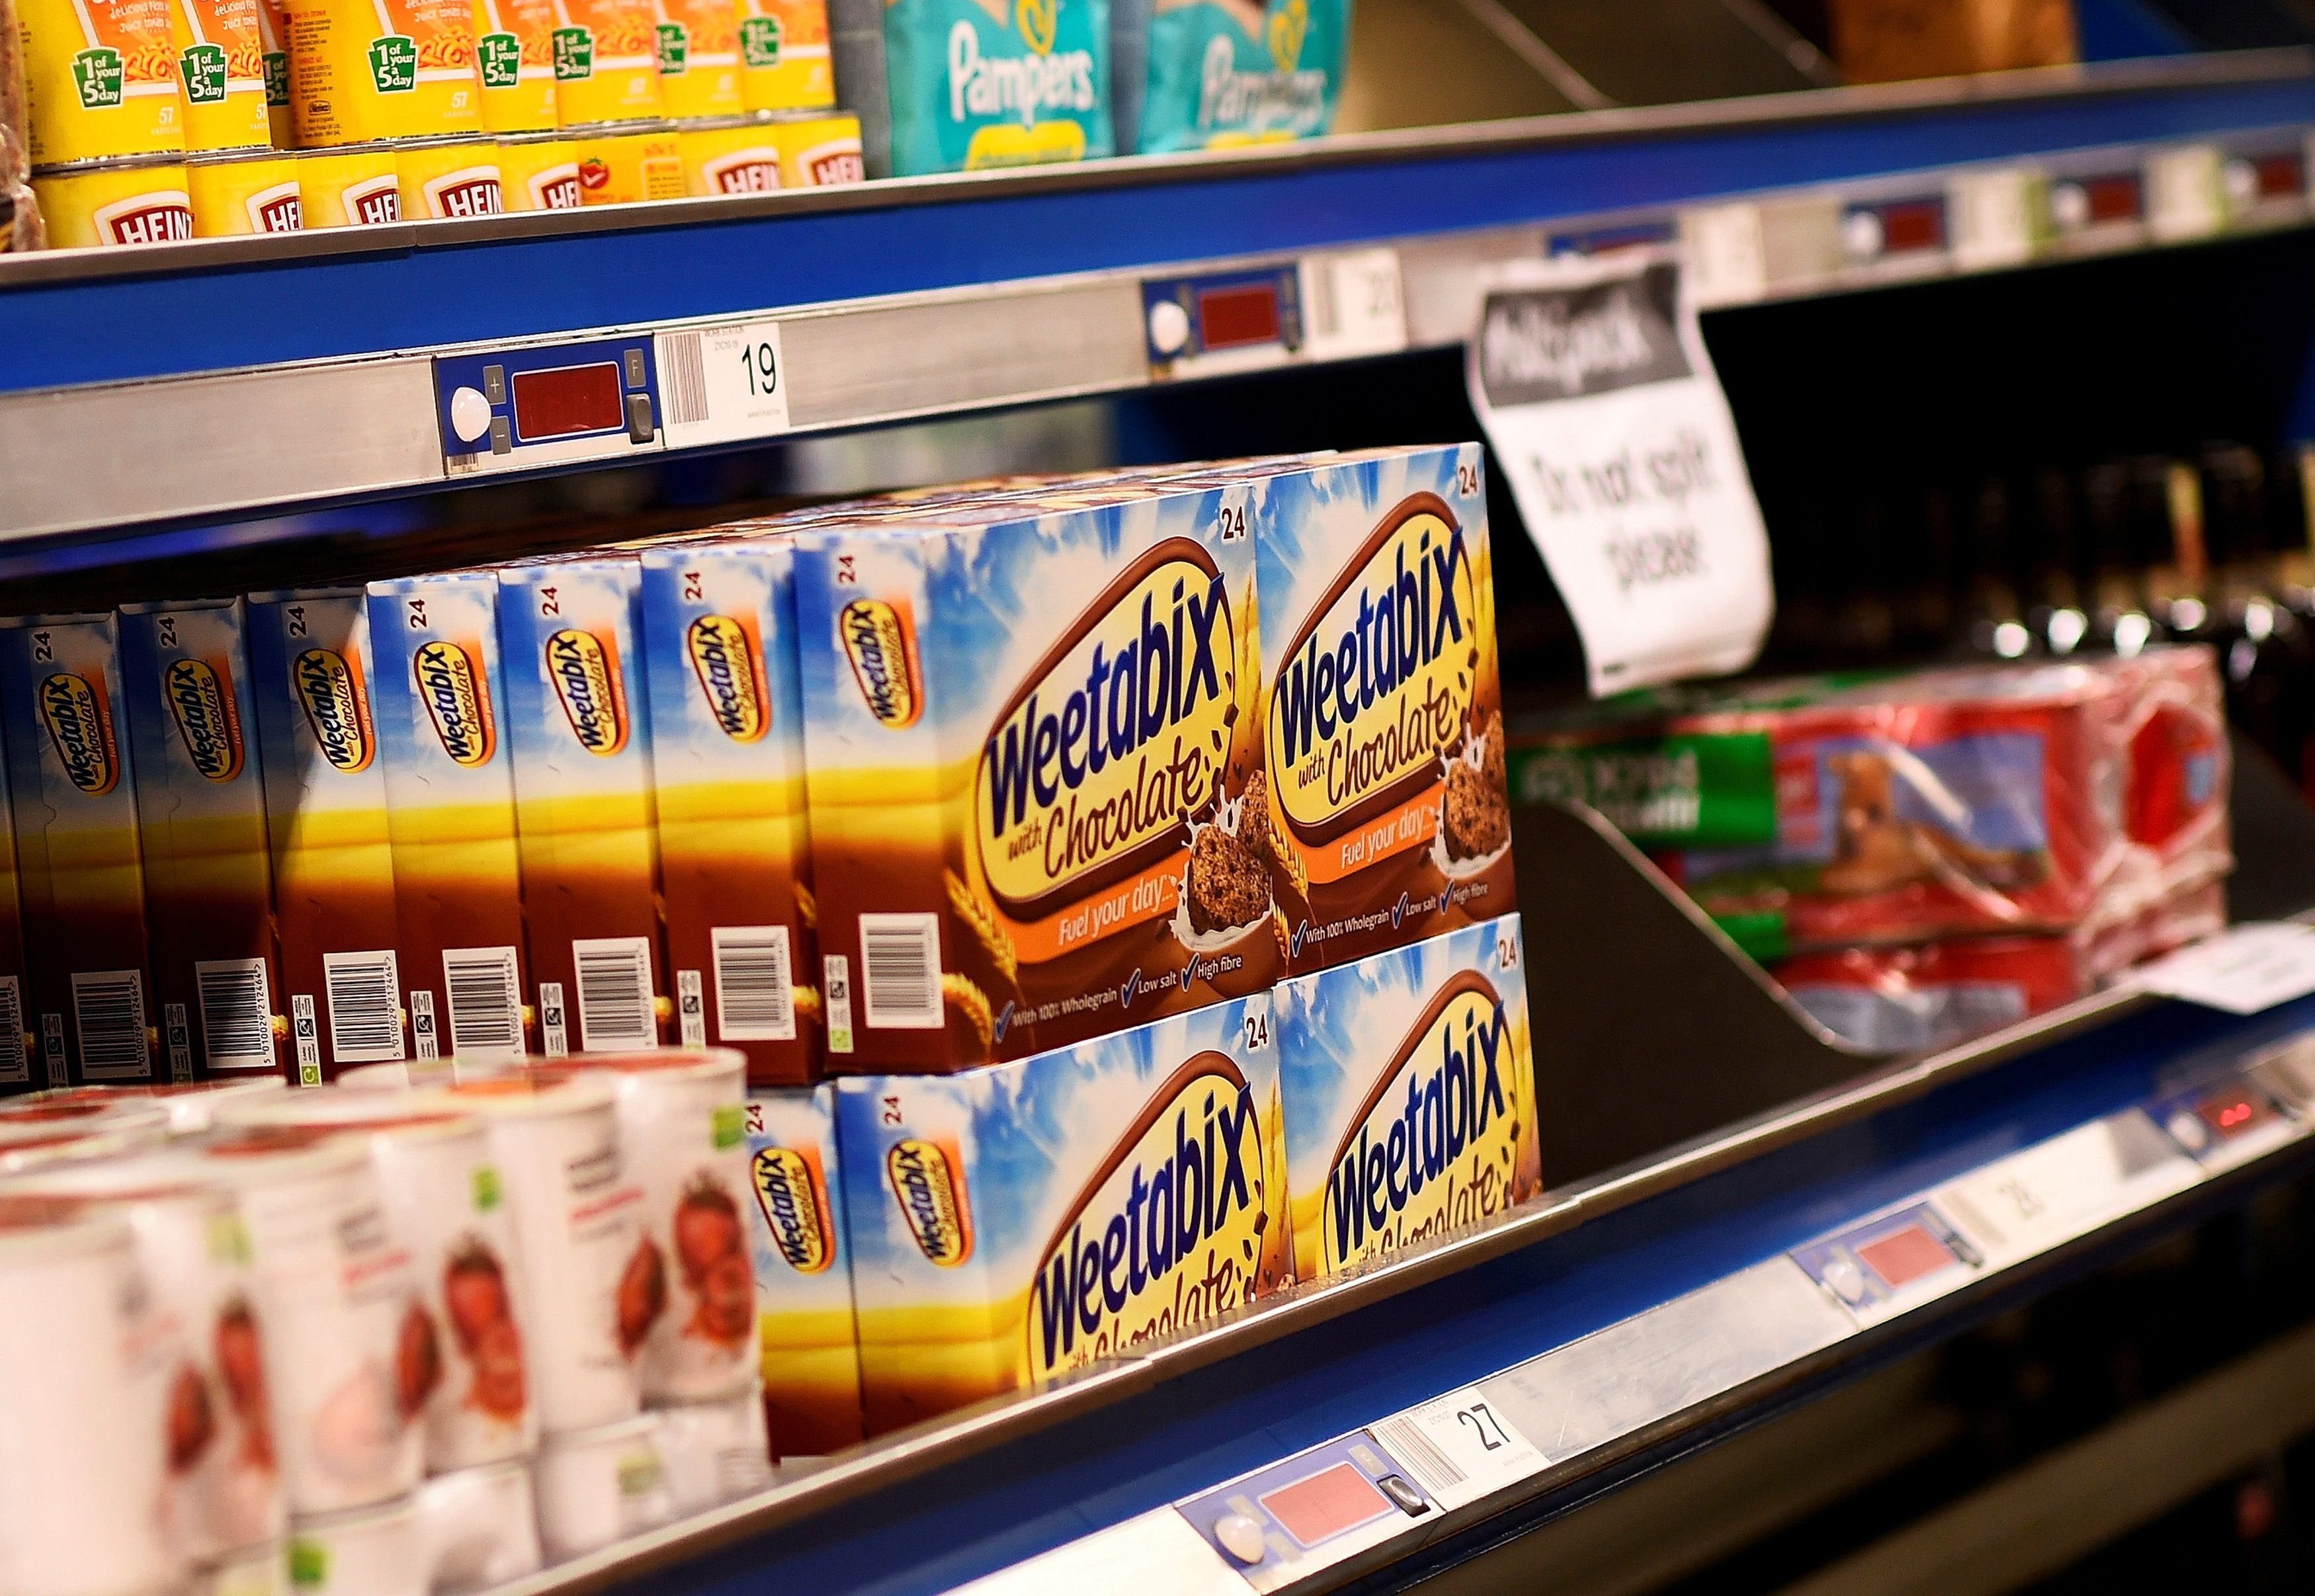 Crunch time for British breakfast as Weetabix workers strike